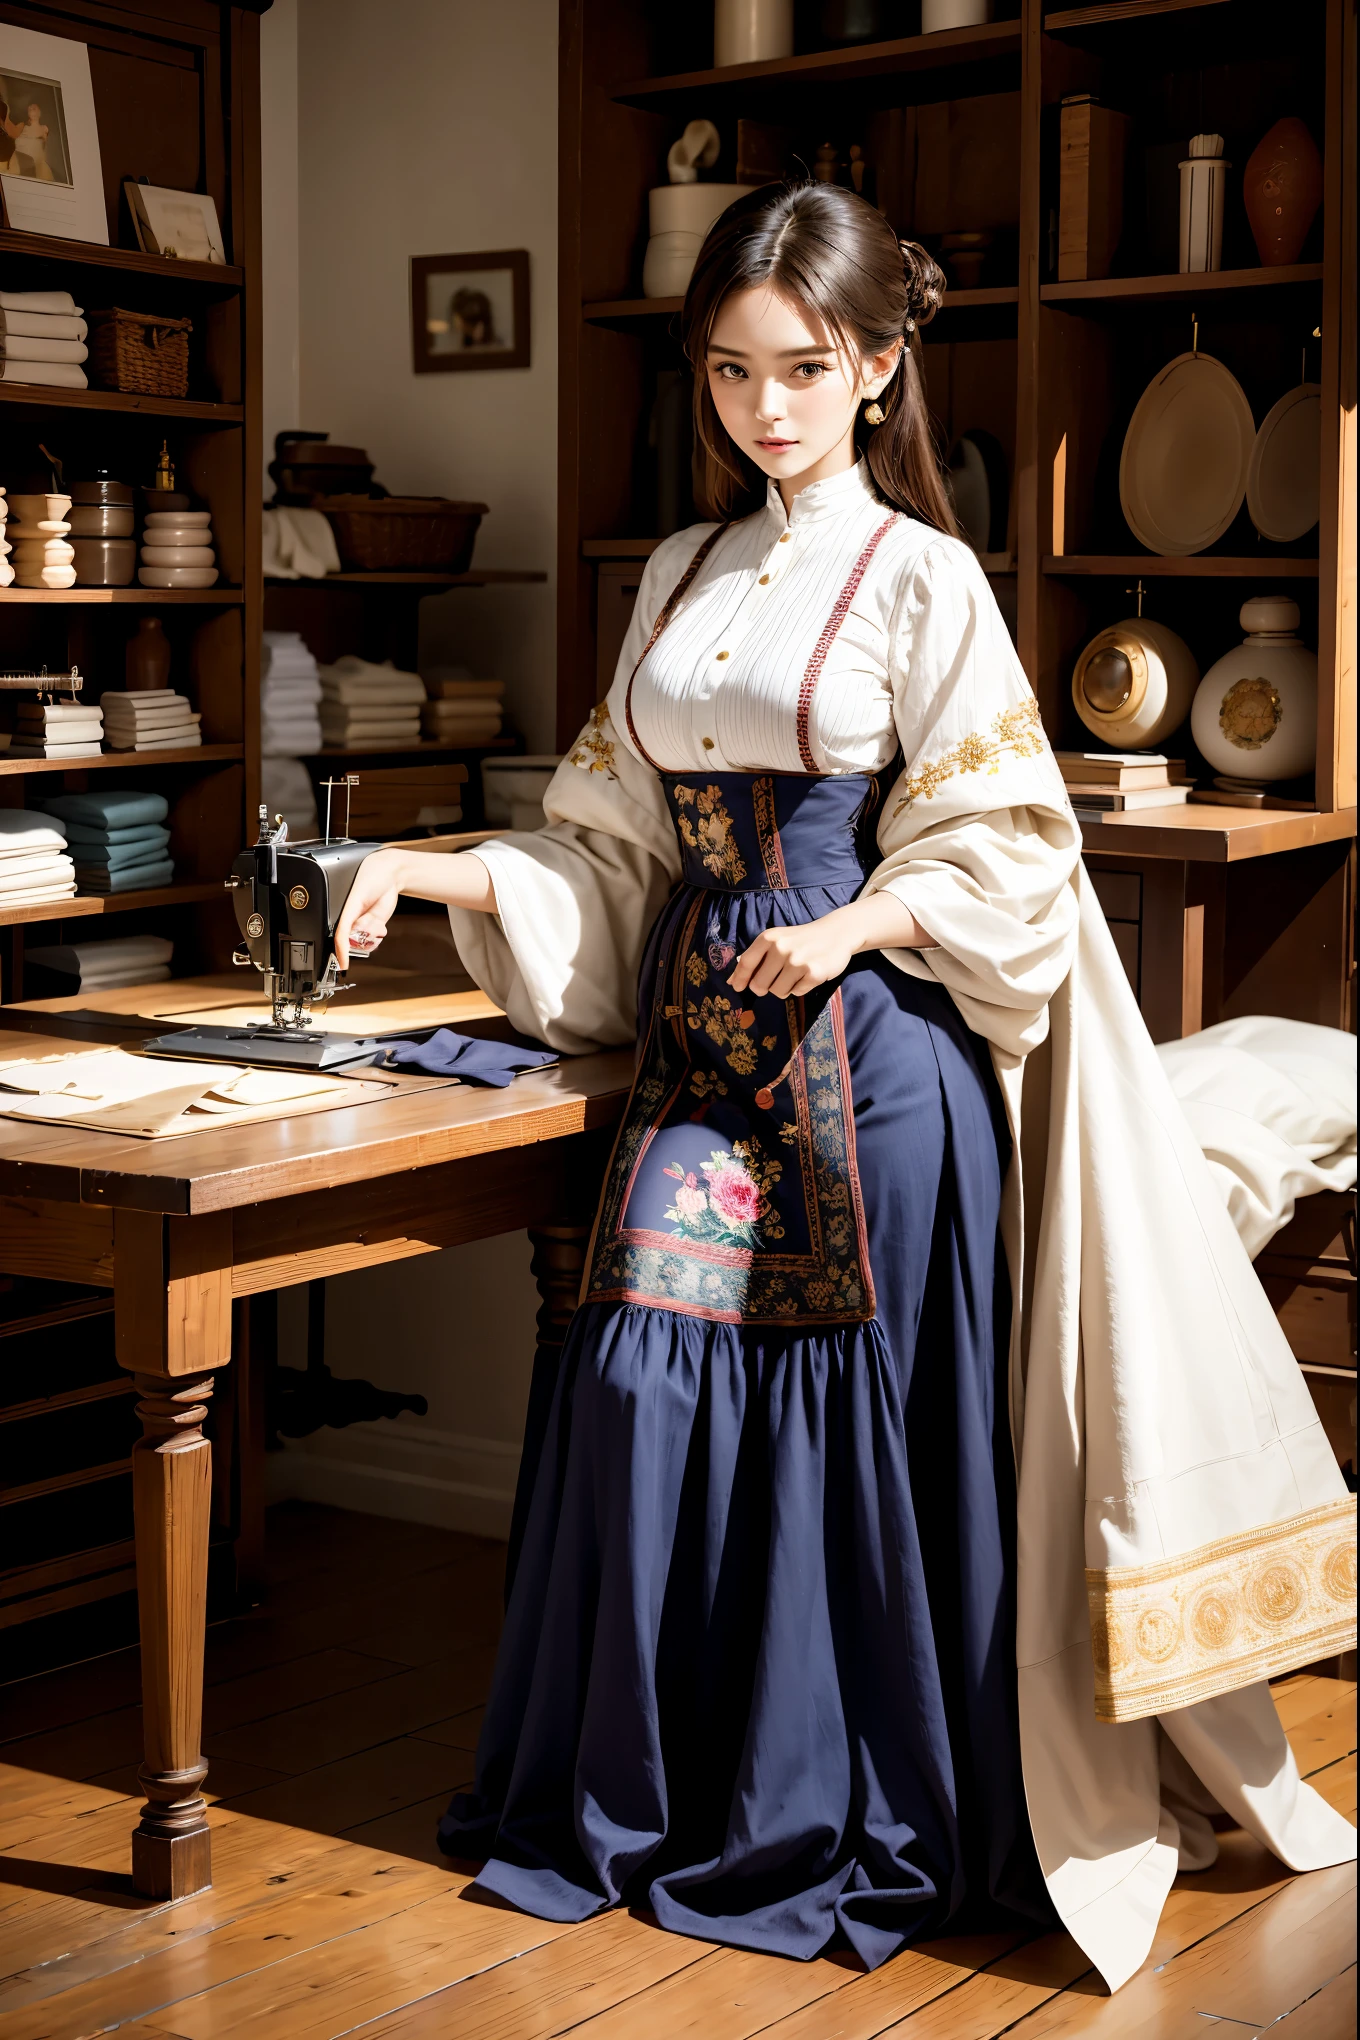 best quality,4k,8k,highres,masterpiece:1.2,ultra-detailed,realistic,photorealistic:1.37,a girl in a tailor shop,fine needlework,vintage sewing machine,sewing scissors and measuring tape,delicate fabric patterns,fashionable outfit design,a colorful spool of thread,precise embroidery and stitching,beautiful detailed eyes,beautiful detailed lips,attentive expression,sewing patterns and sketches,sewing mannequin with dress form,mannequin pins and pin cushion,shelves filled with fabric rolls and ribbons,vibrant colors and textures,soft natural lighting,sewing notions and tools,sewing buttons and zippers,needle and thread,sewing thimble and pincushion,sewing patterns and fabrics,rustic wooden worktable and stool,vintage sewing patterns,seamstress working on a sewing project,scissors cutting through the fabric,piles of finished garments,passionate and skilled craftsmanship,sewing machine pedal and footplate,bustling atmosphere of the tailor shop,creative and inspiring environment,a glimpse of a beautifully tailored dress,background of fashion sketches and fashion magazines